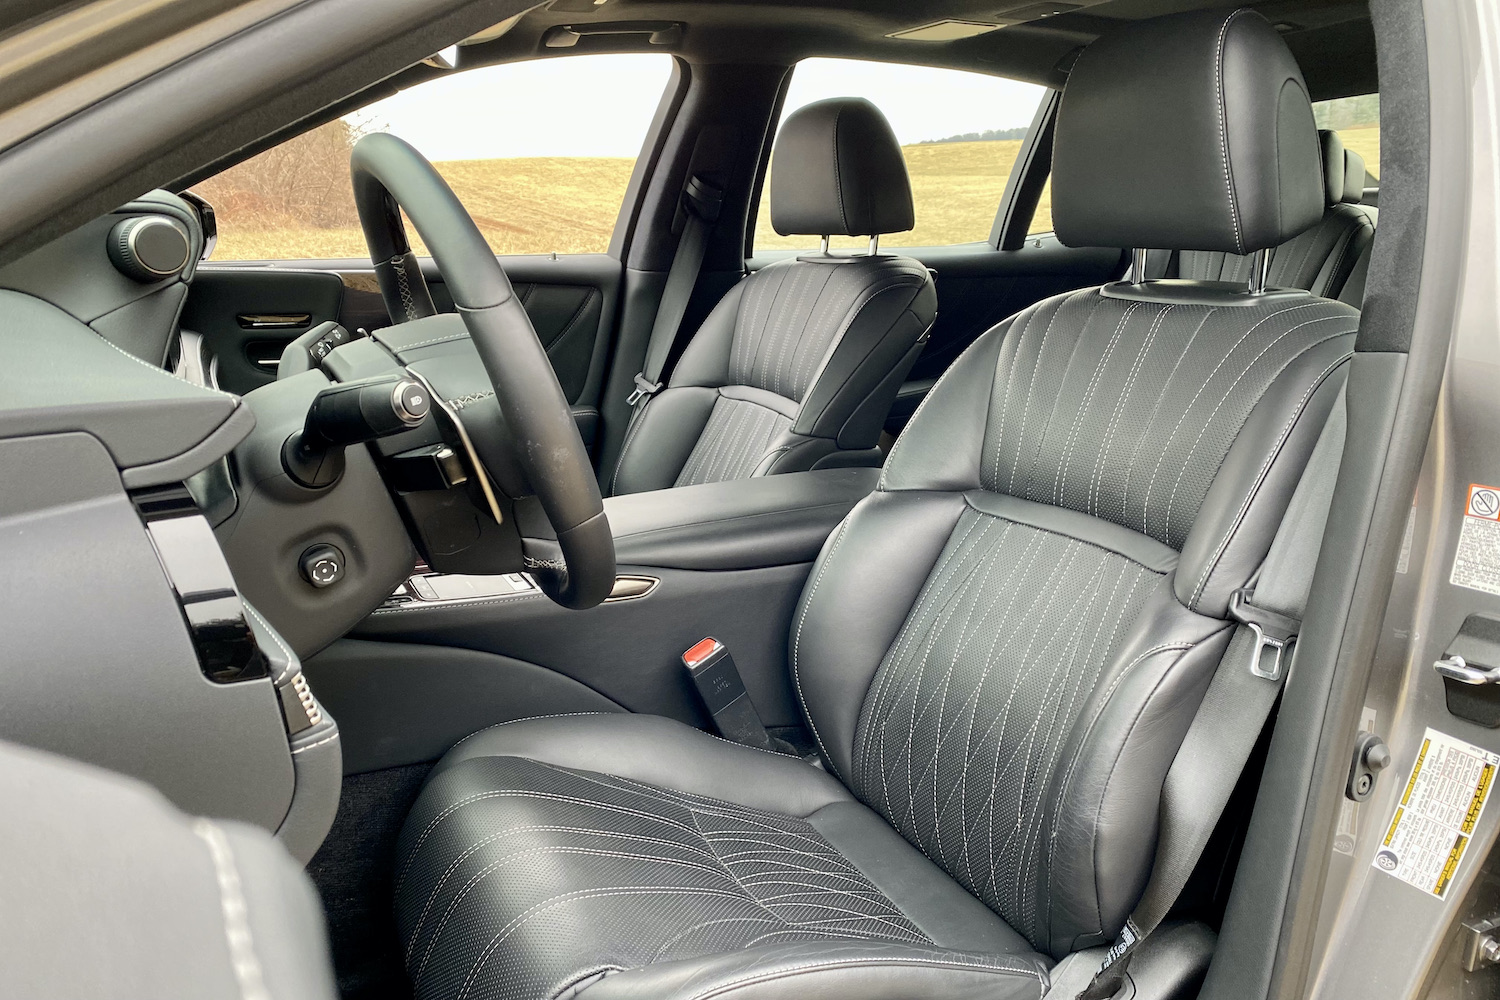 The driver's seat of the 2021 Lexus LS500 from outside.